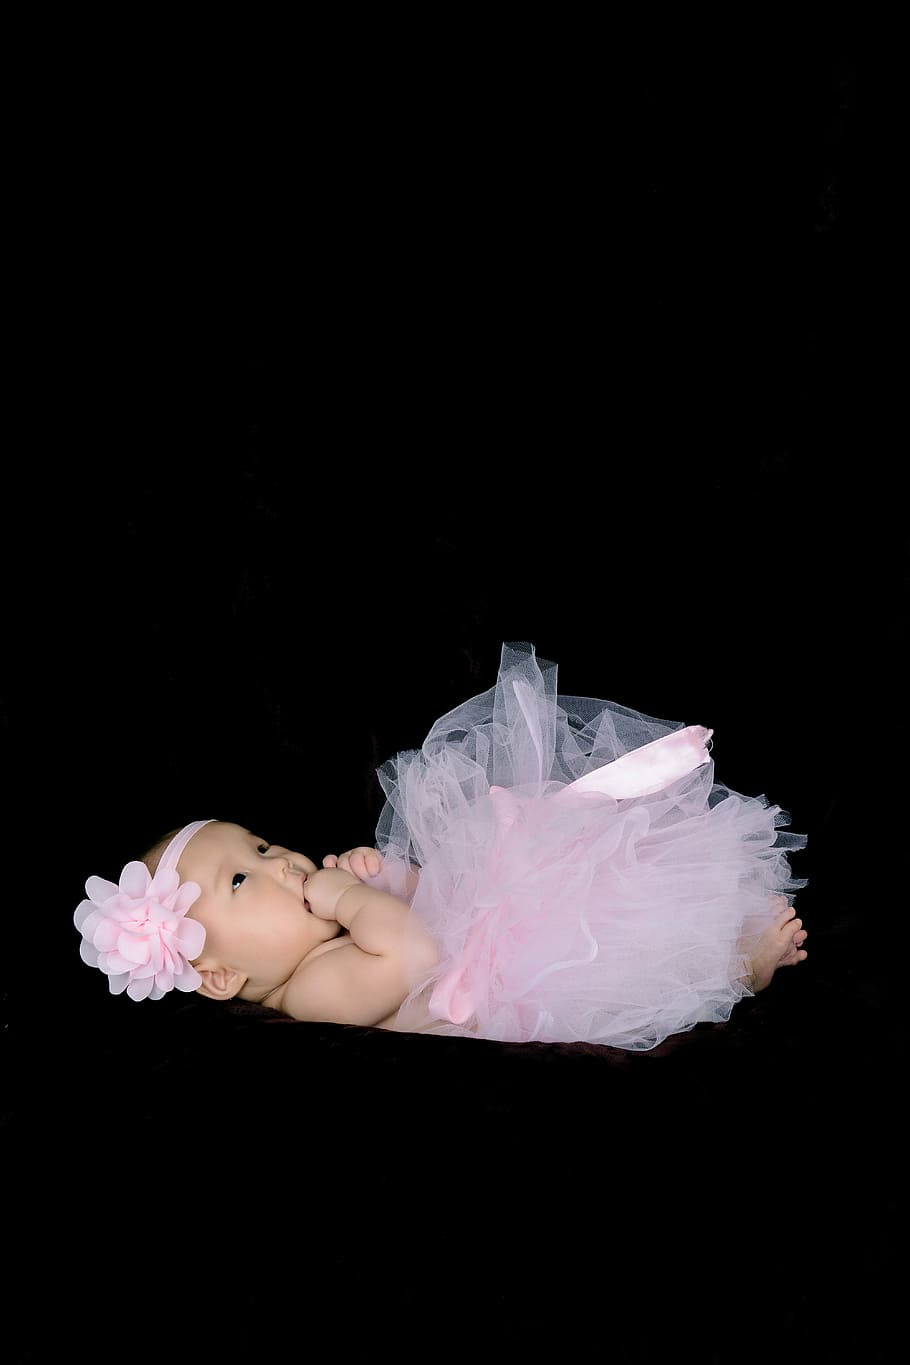 one hundred days baby, girls, be quiet, studio shot, black background, pink color, indoors, one person, copy space, flower